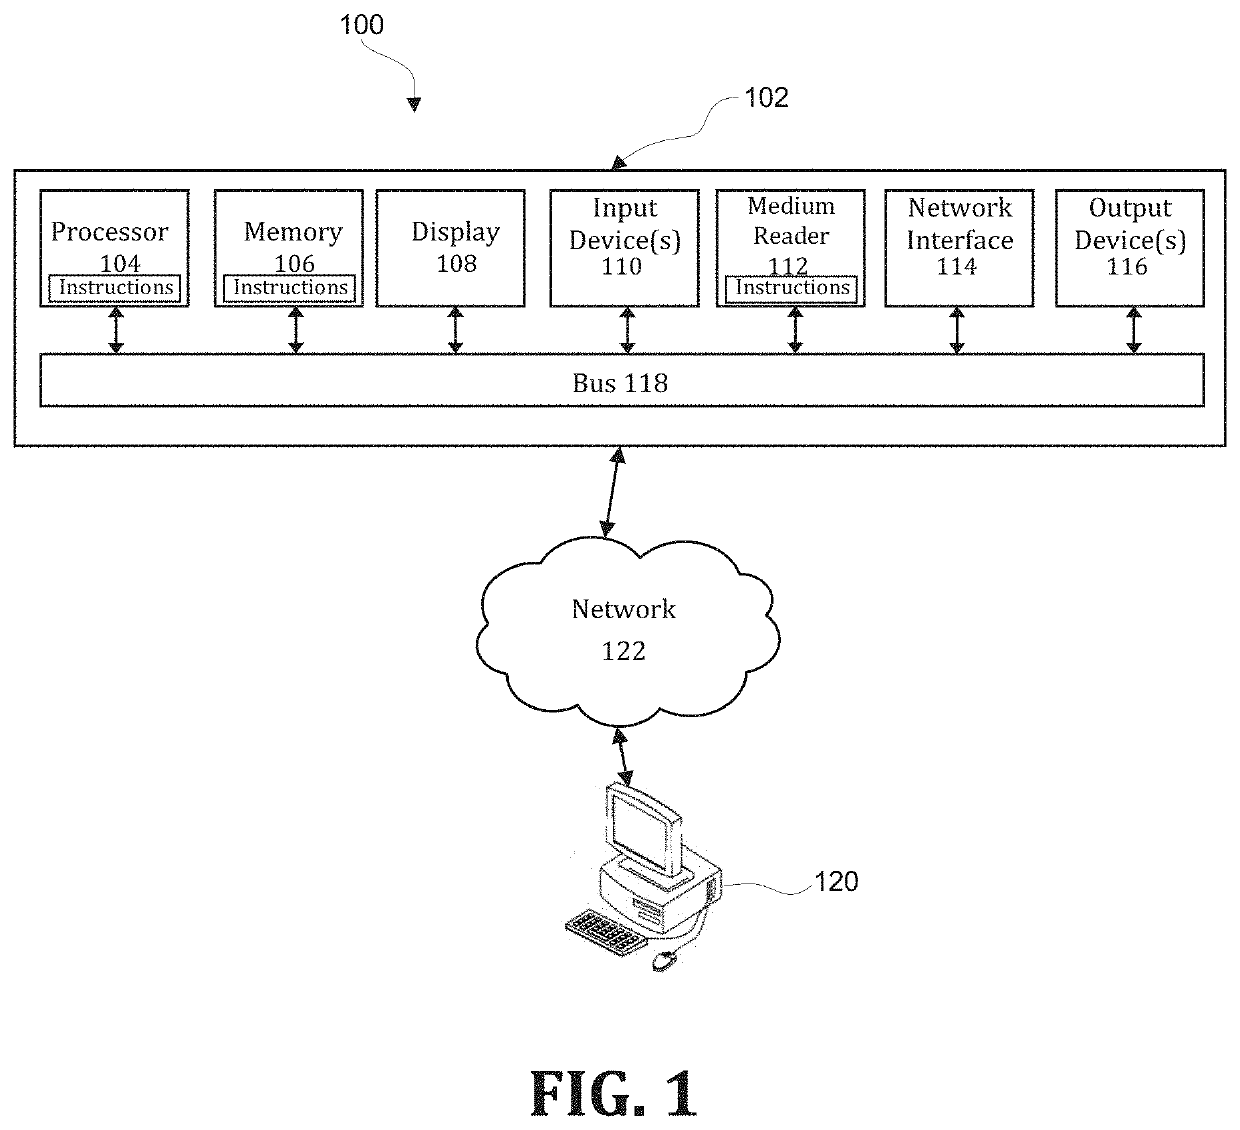 Method for real-time redaction of sensitive information from audio stream